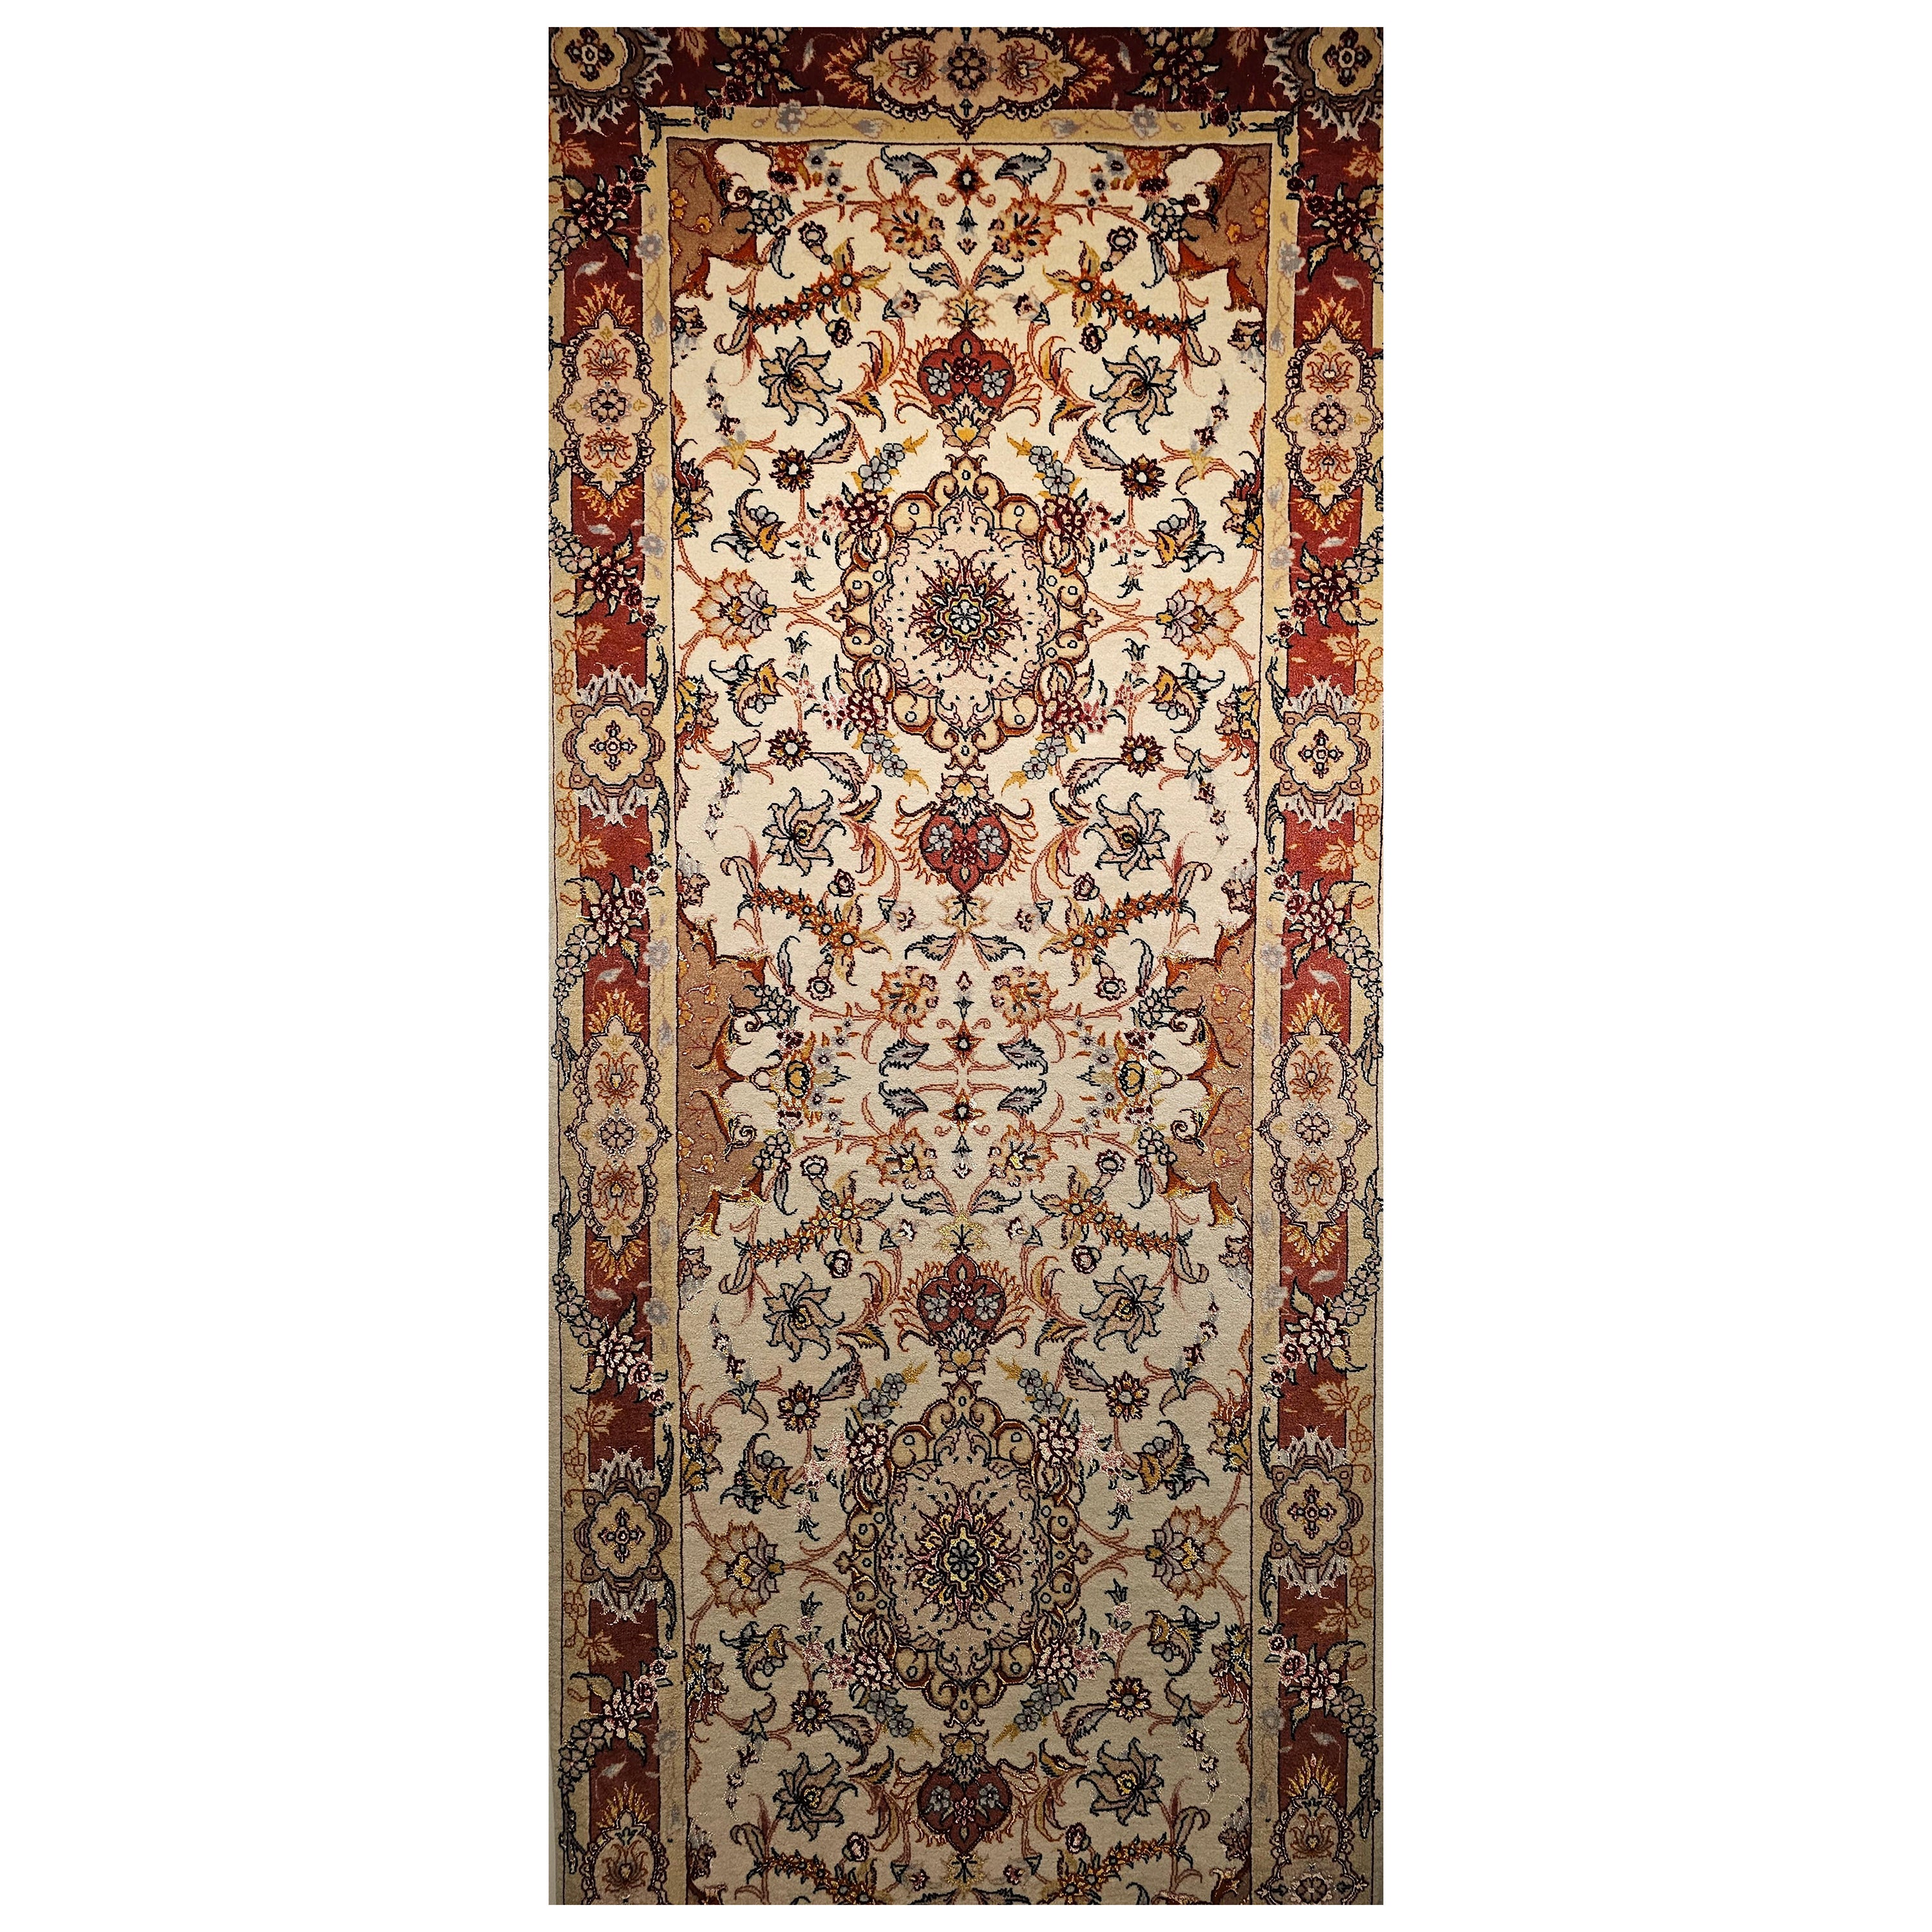 Vintage Persian Tabriz Runner in a Floral Pattern in Salmon, Pink, Ivory, Blue